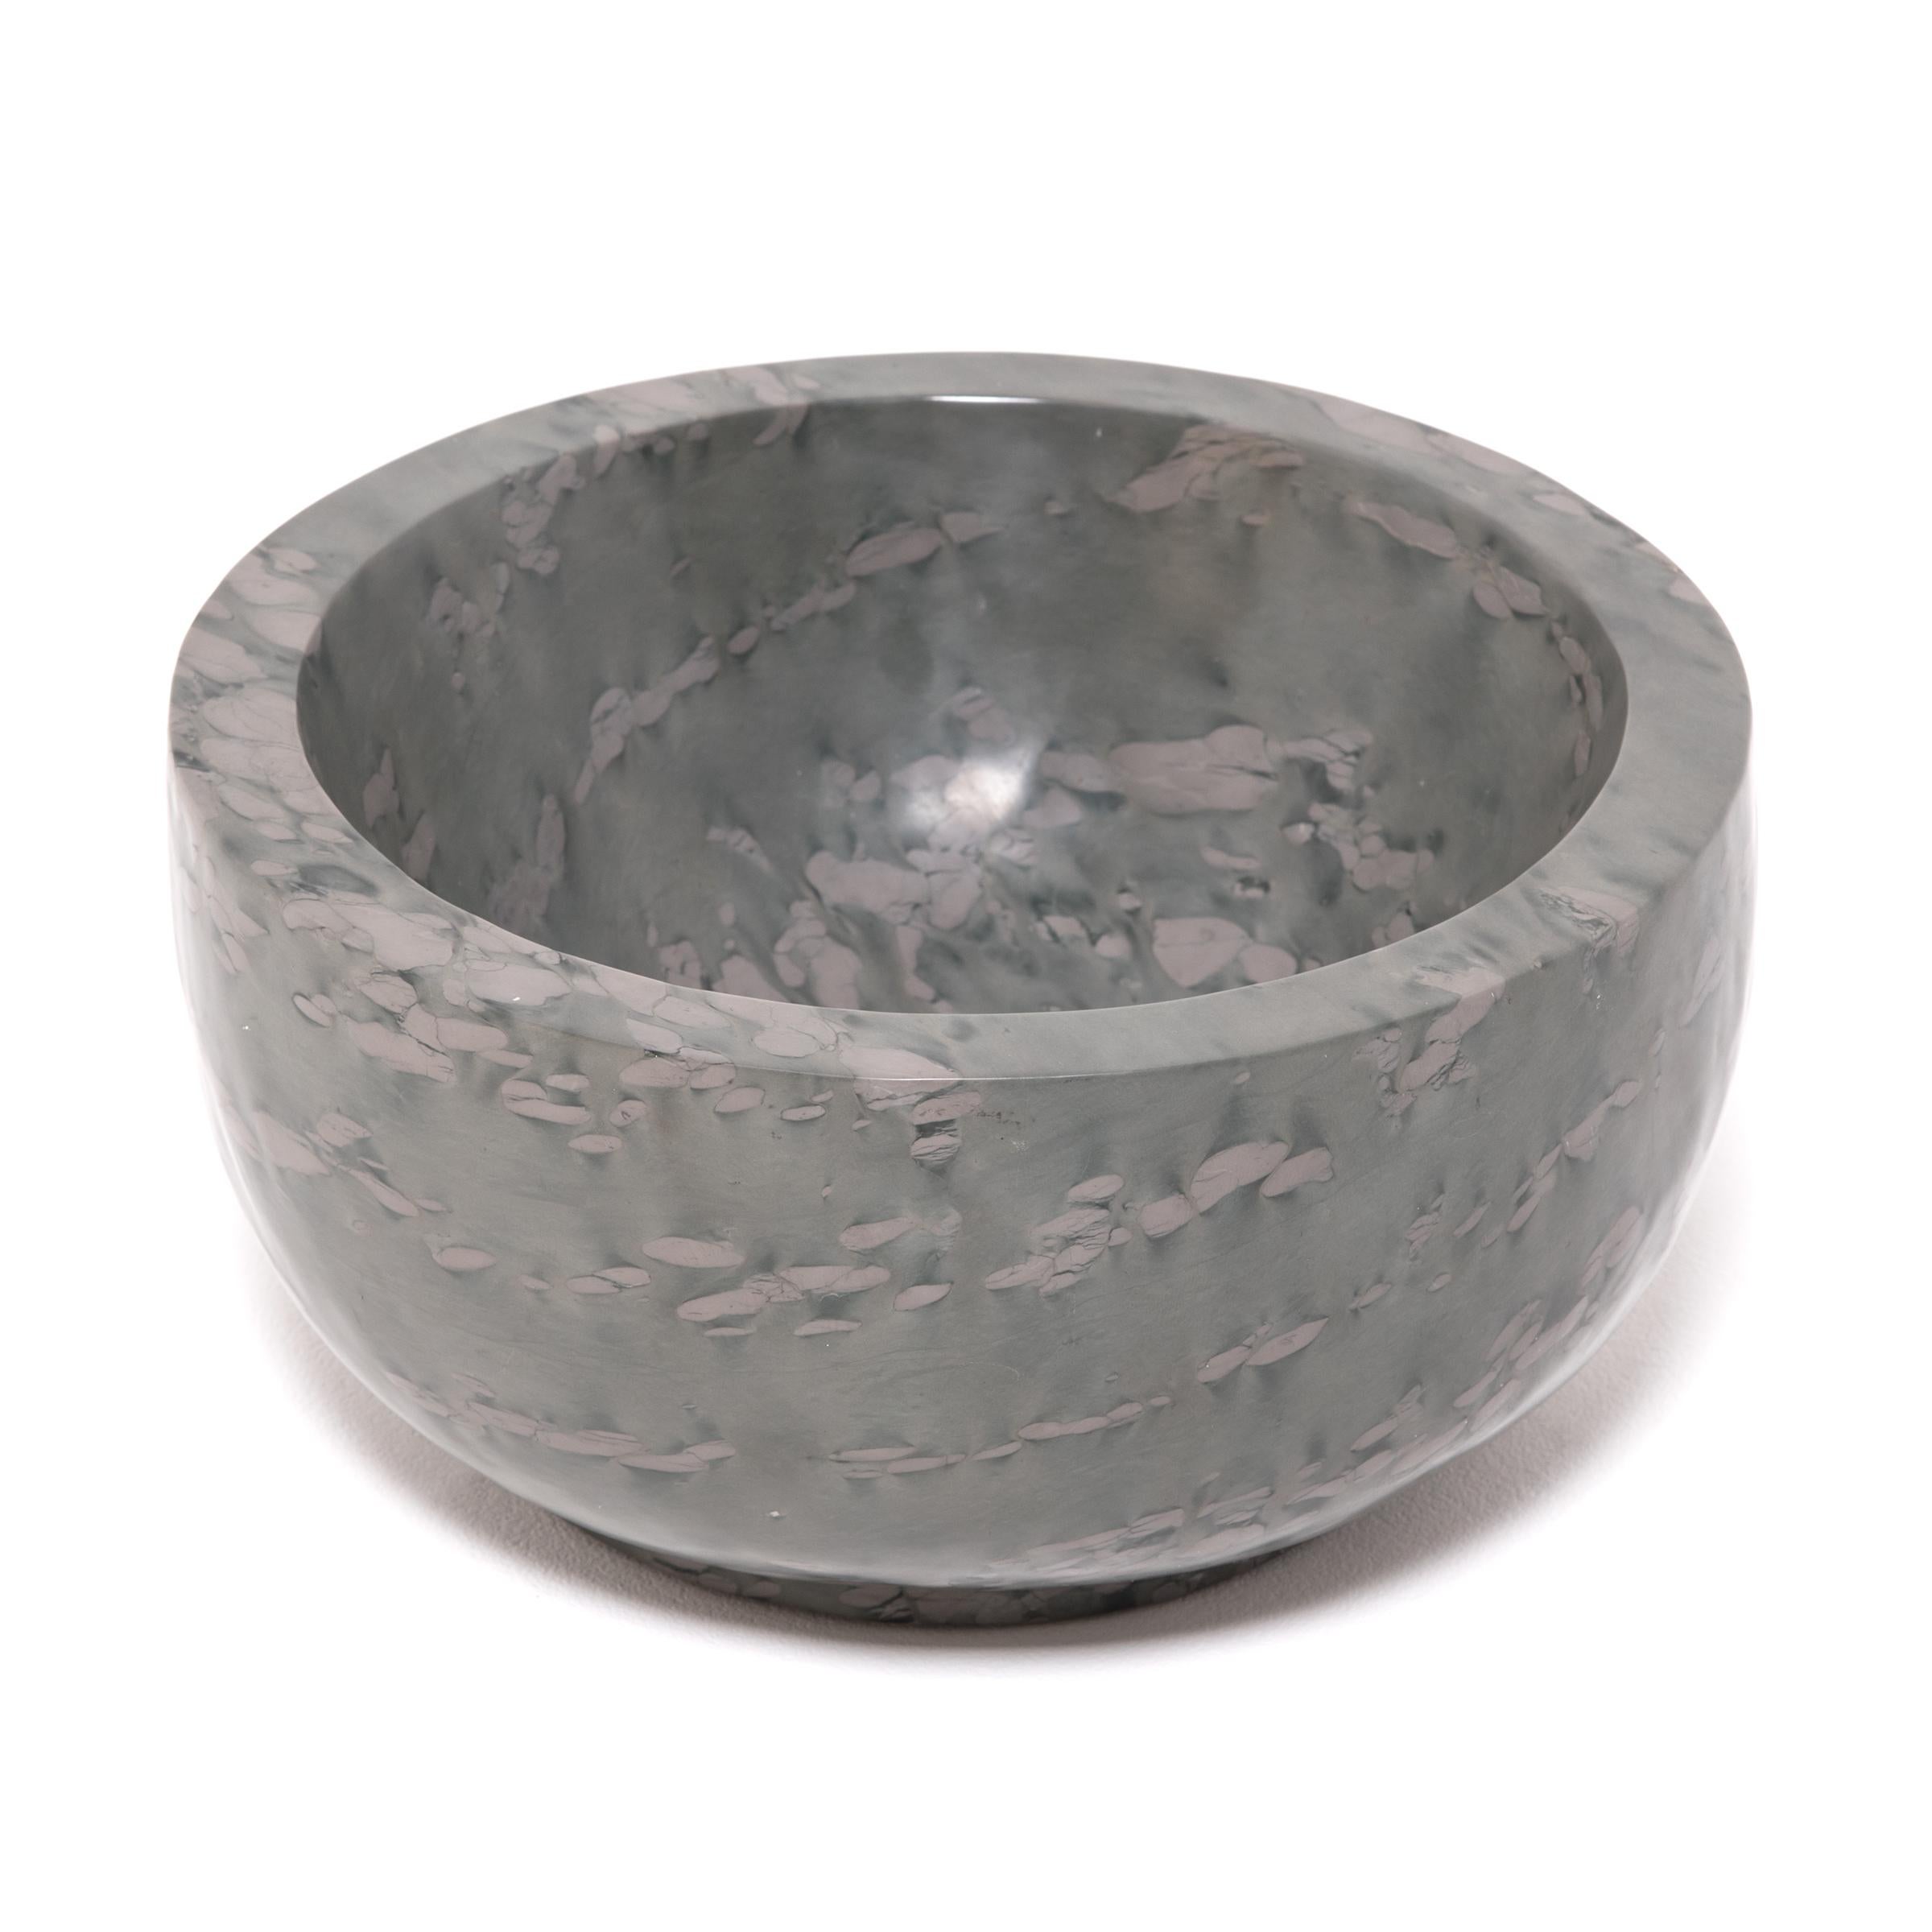 A clean-lined interpretation of an ancient form, this footed basin was hand carved by artisans in China's Shandong province. The mesmerizing pattern of zhenzhu is inherent to the stone, a conglomerate limestone extracted from Lake Tai in Jiangsu